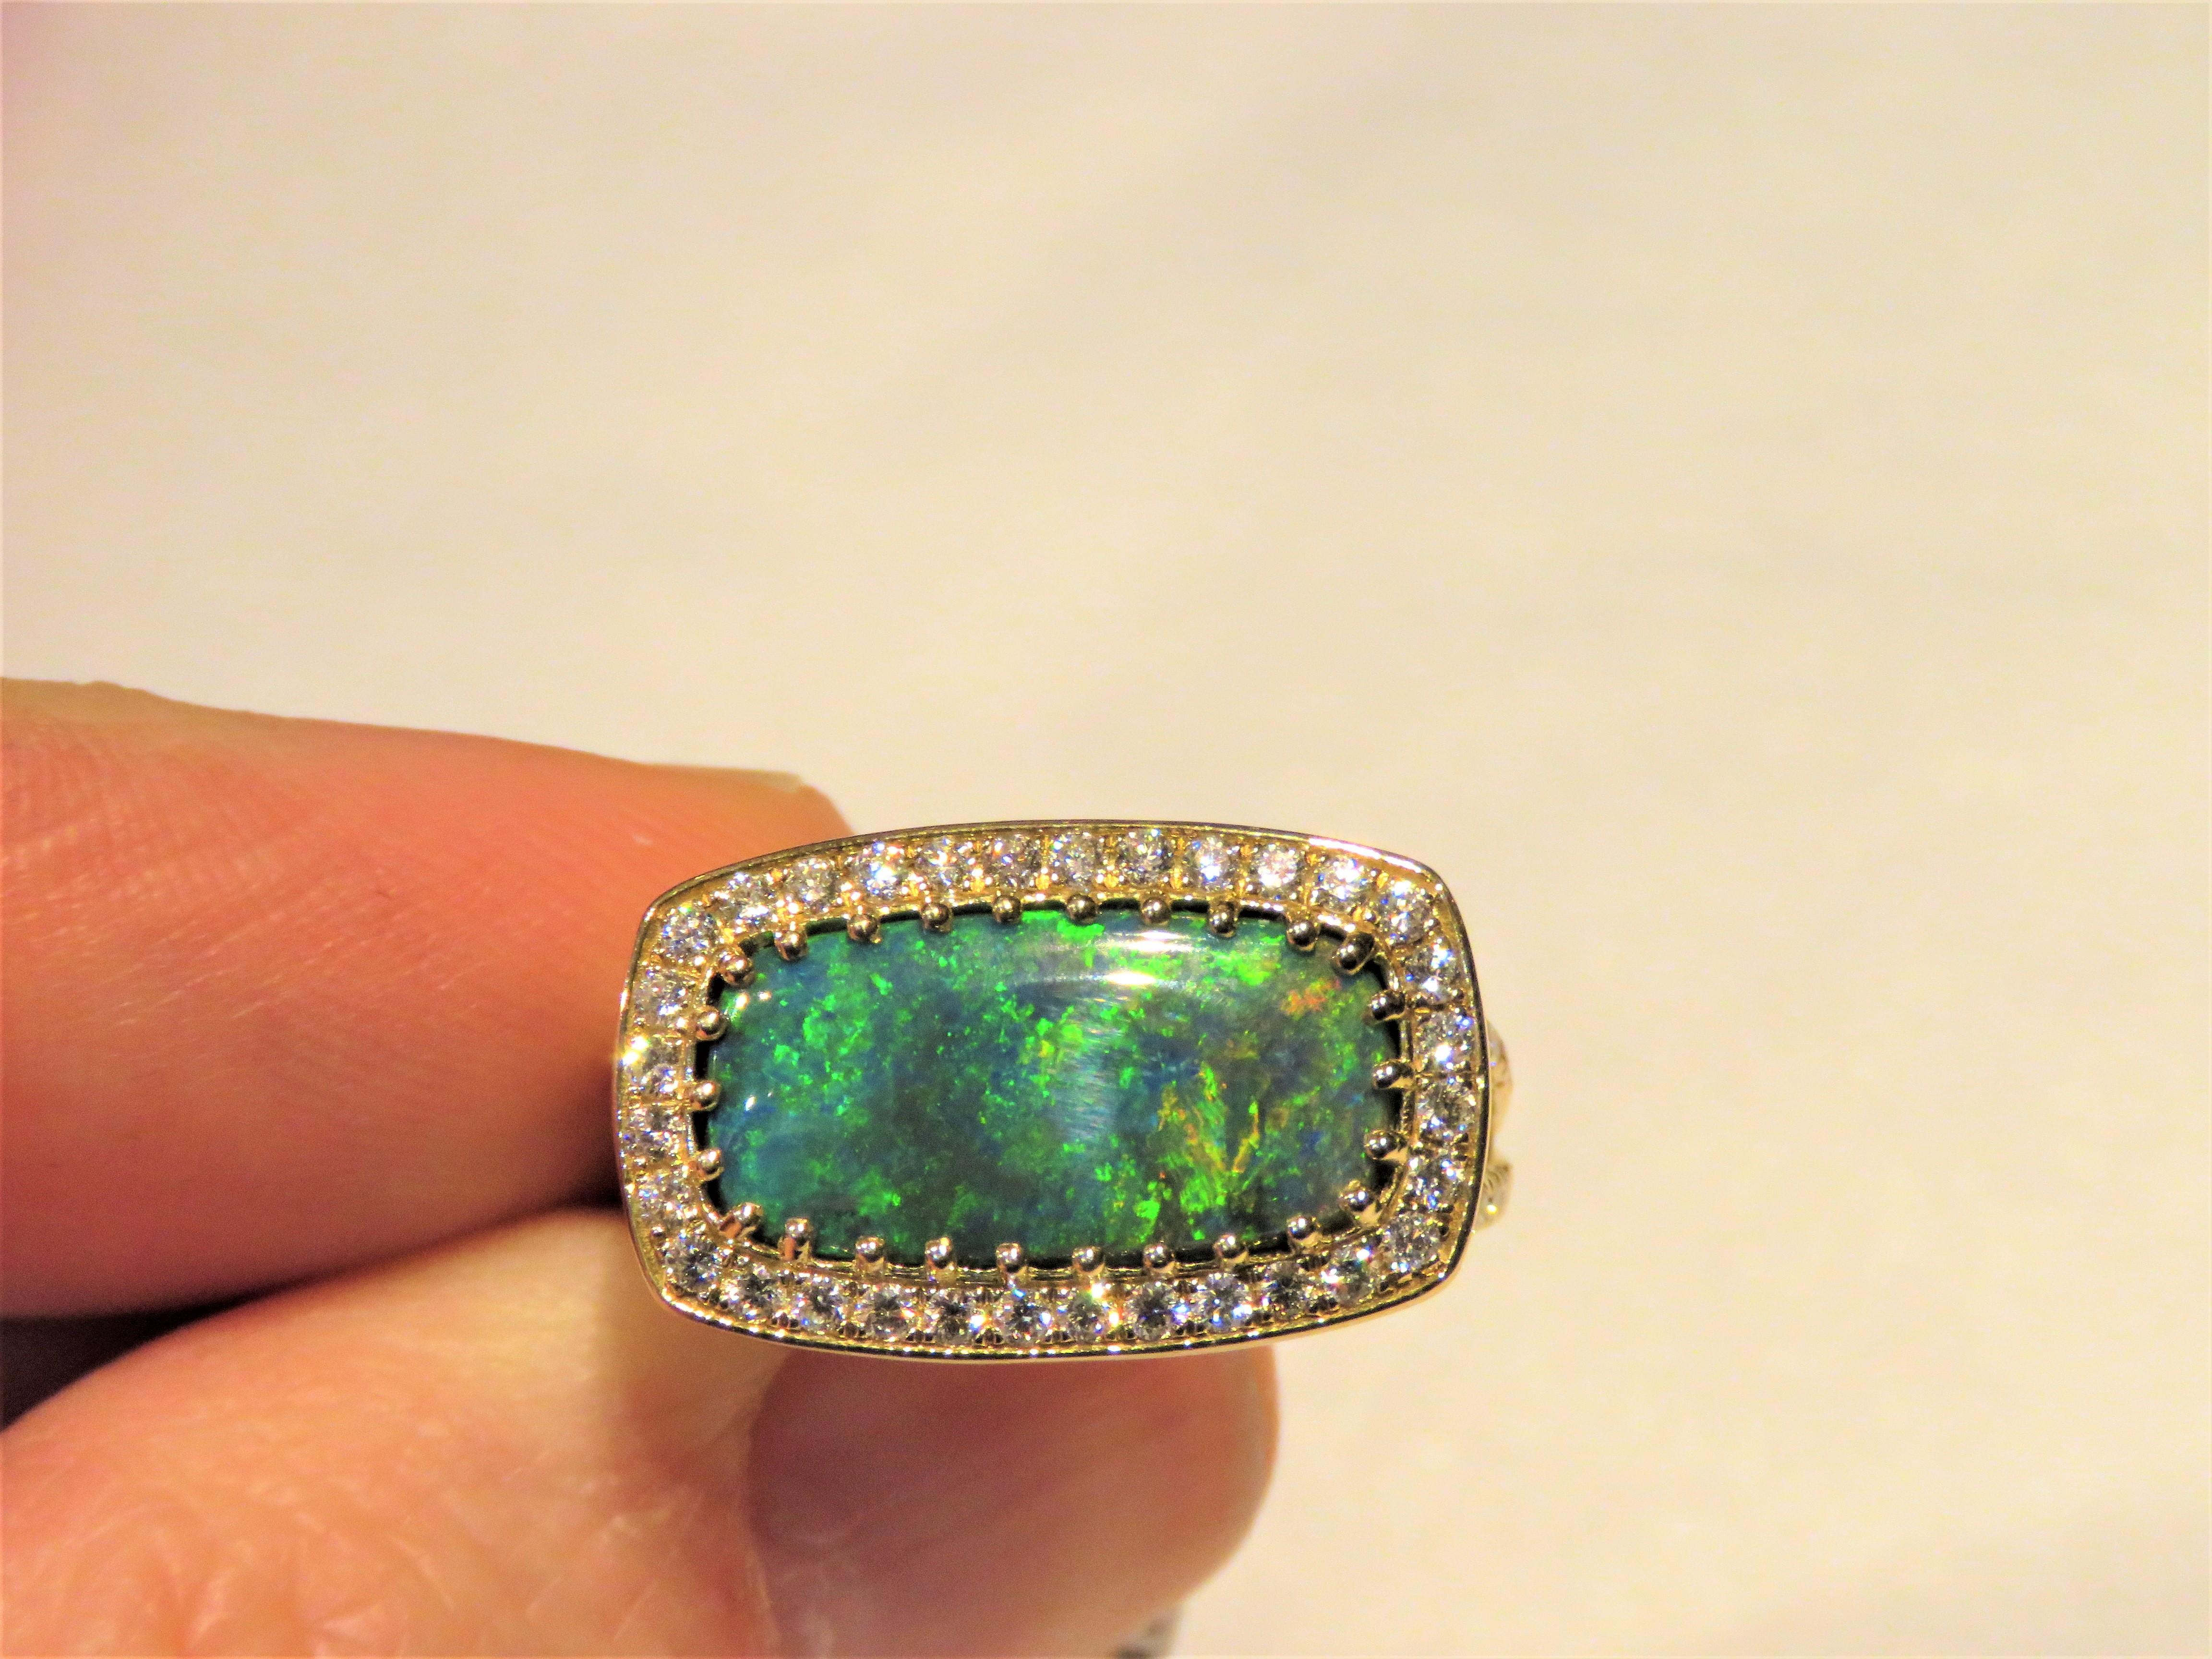 The Following Items we are offering is a Rare Important Spectacular and Brilliant 18KT Gold Large Gorgeous Black Opal Diamond Ring. Ring consists of a Rare Fine Magnificent Rare Lightening Ridge Black Opal surrounded with Gorgeous Glittering